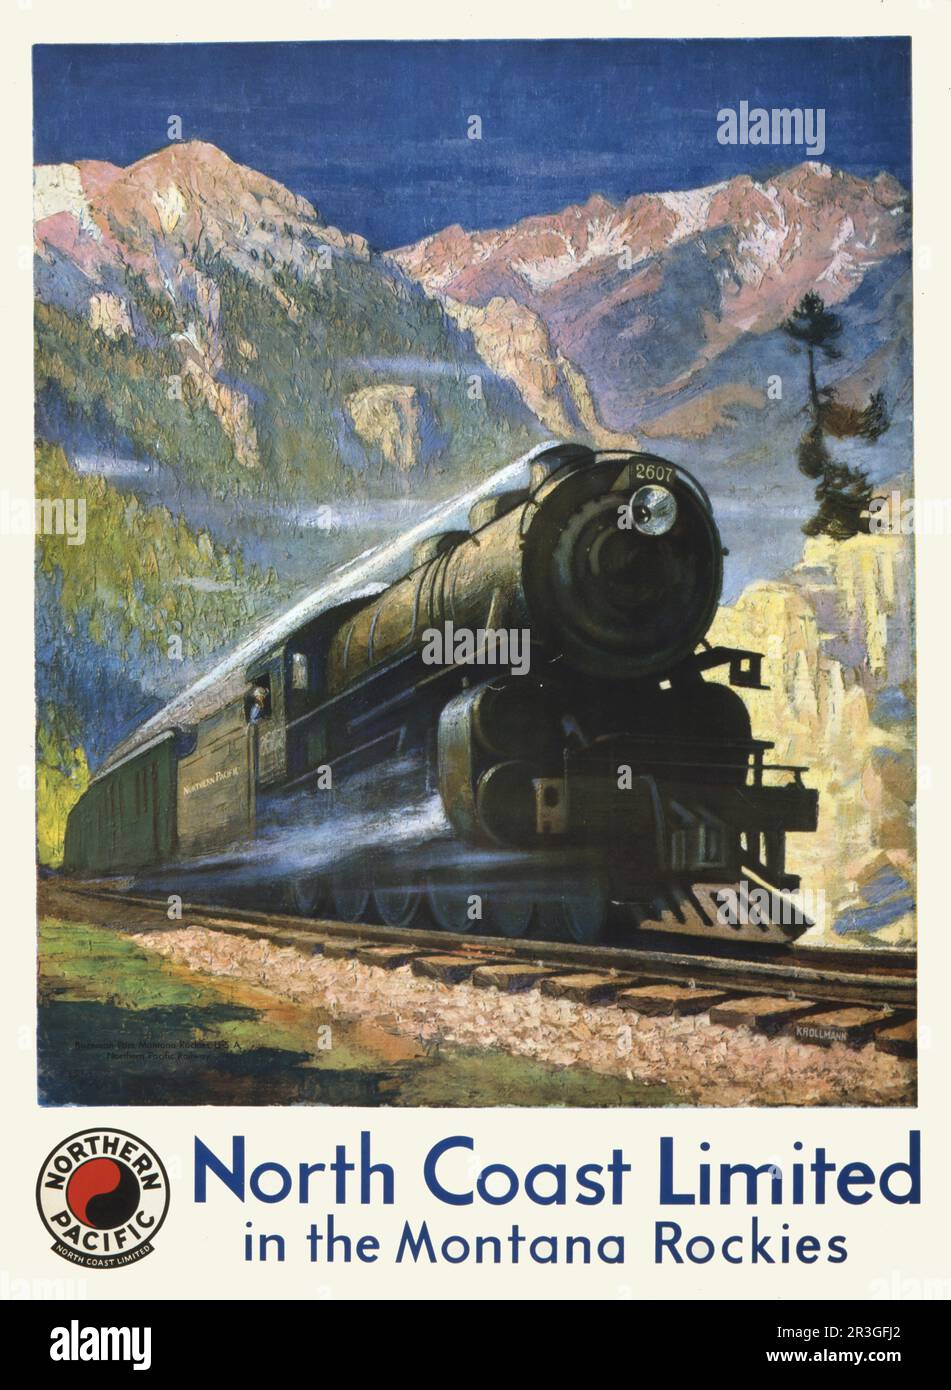 Vintage travel poster for North Coast Limited in the Montana Rockies, showing a steam engine in Bozeman Pass. Stock Photo